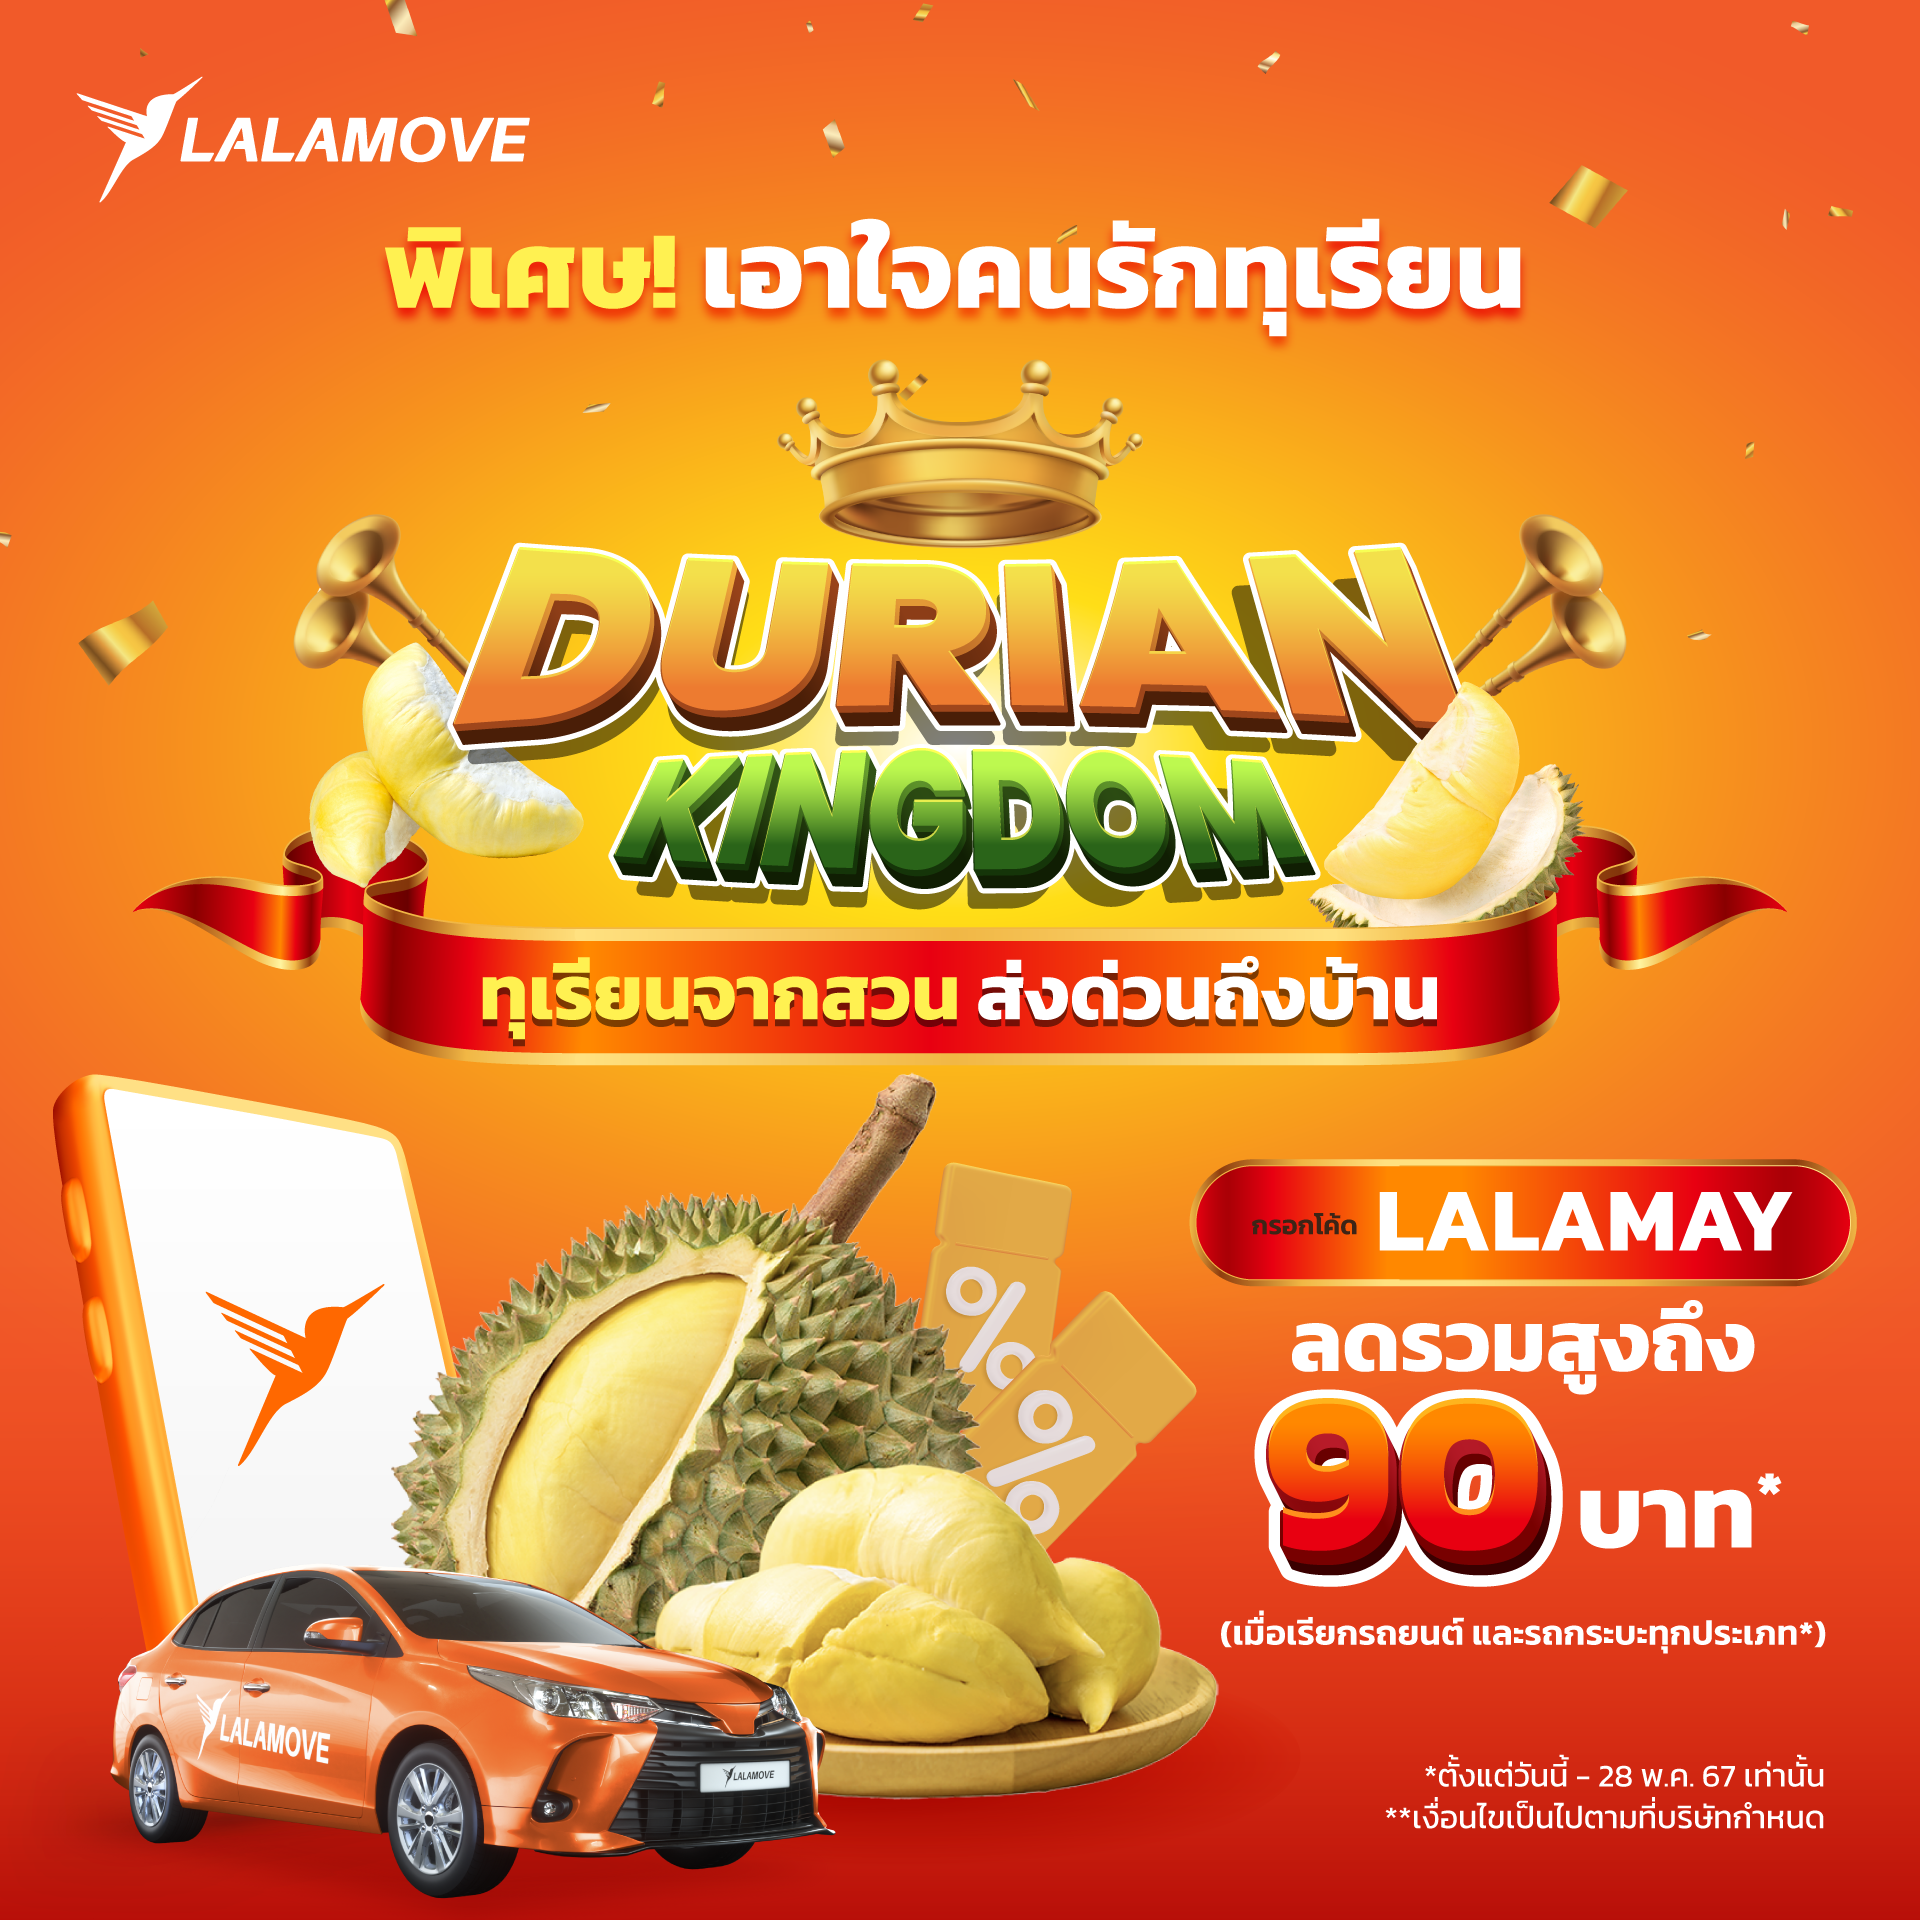 Durian Kingdon for Durian lover